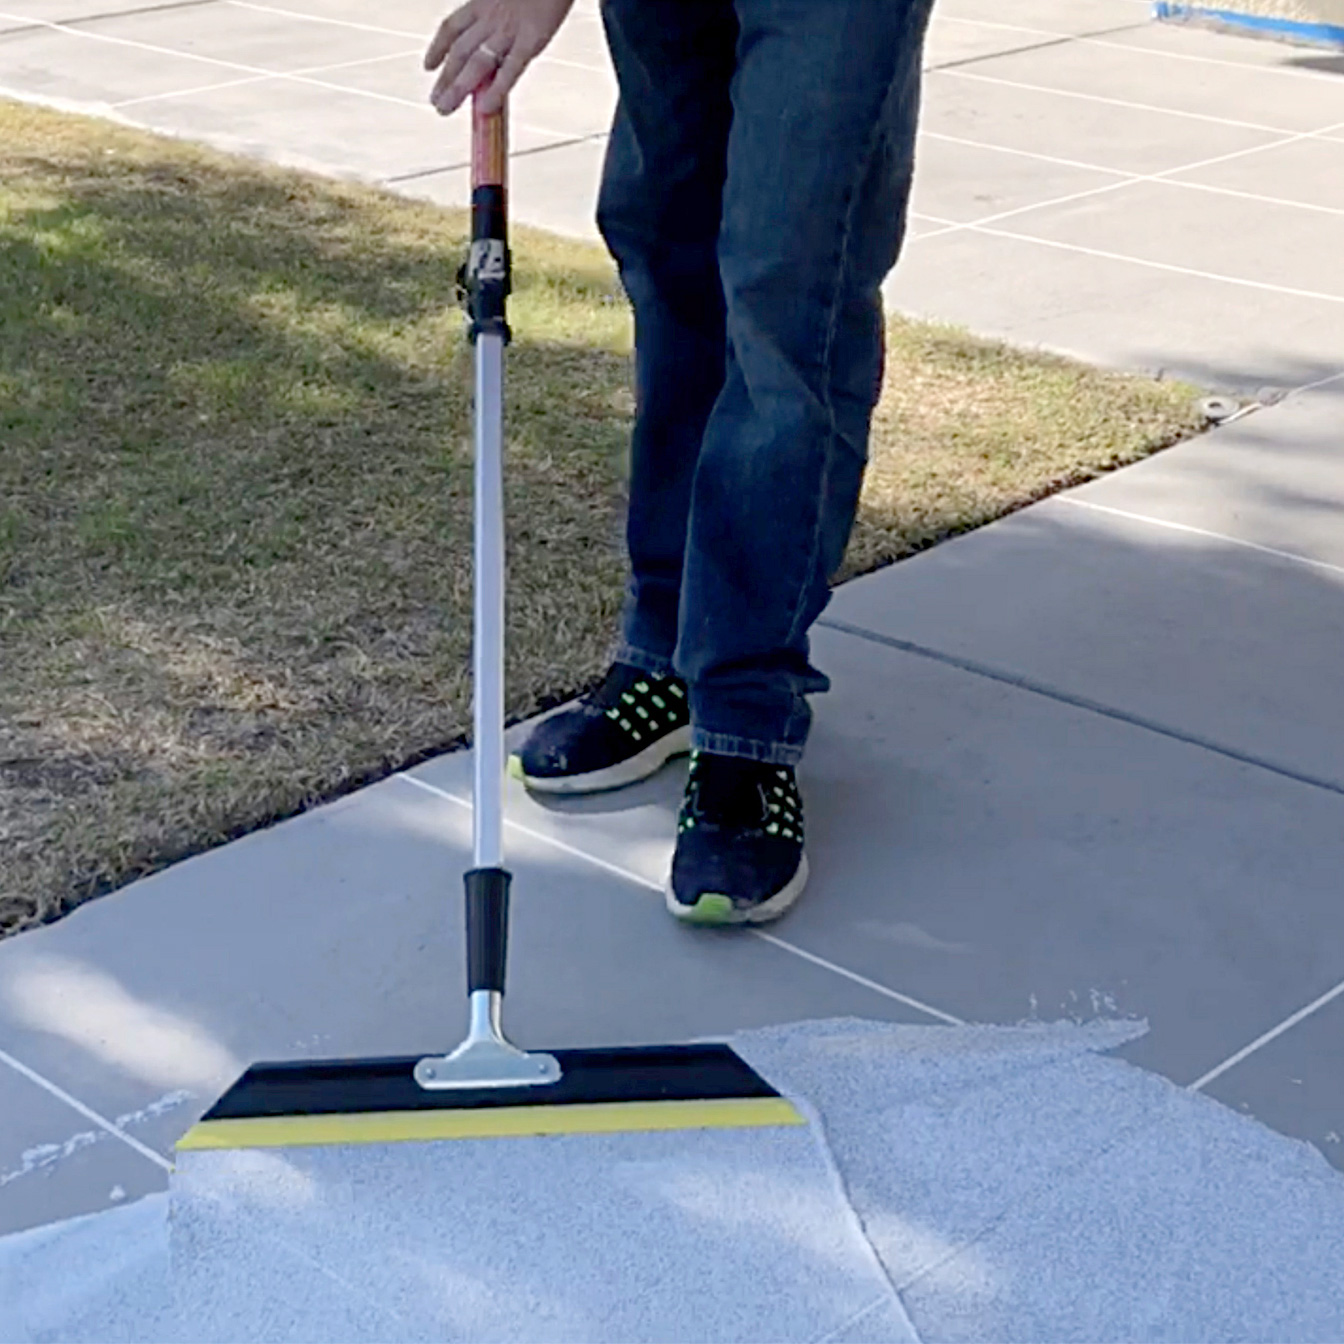 SpreadRock can easily be applied with a squeegee to give a walkway a new look.